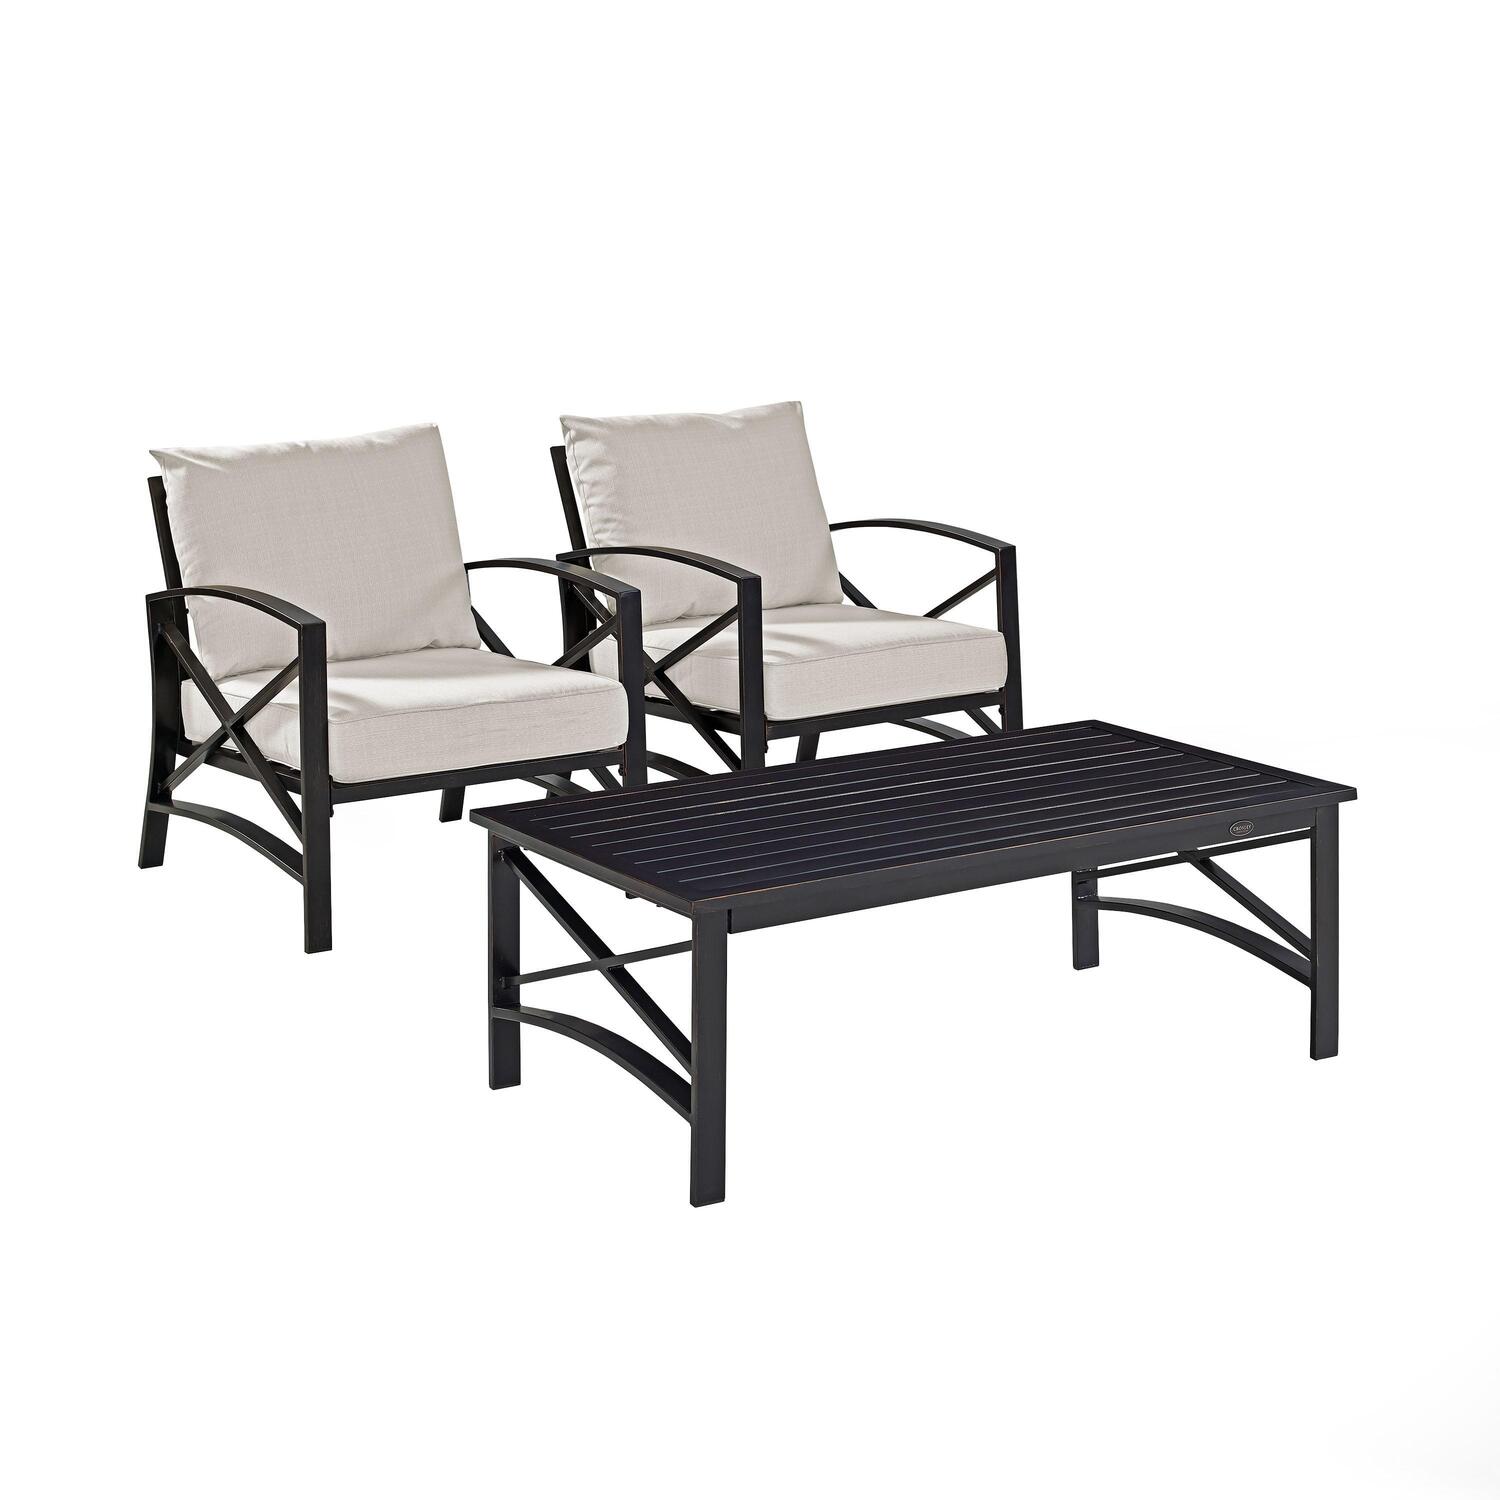 Crosley Furniture Kaplan 3 Pc Outdoor Seating Set With Oatmeal Cushion - Two Outdoor Chairs, Coffee Table - image 1 of 8